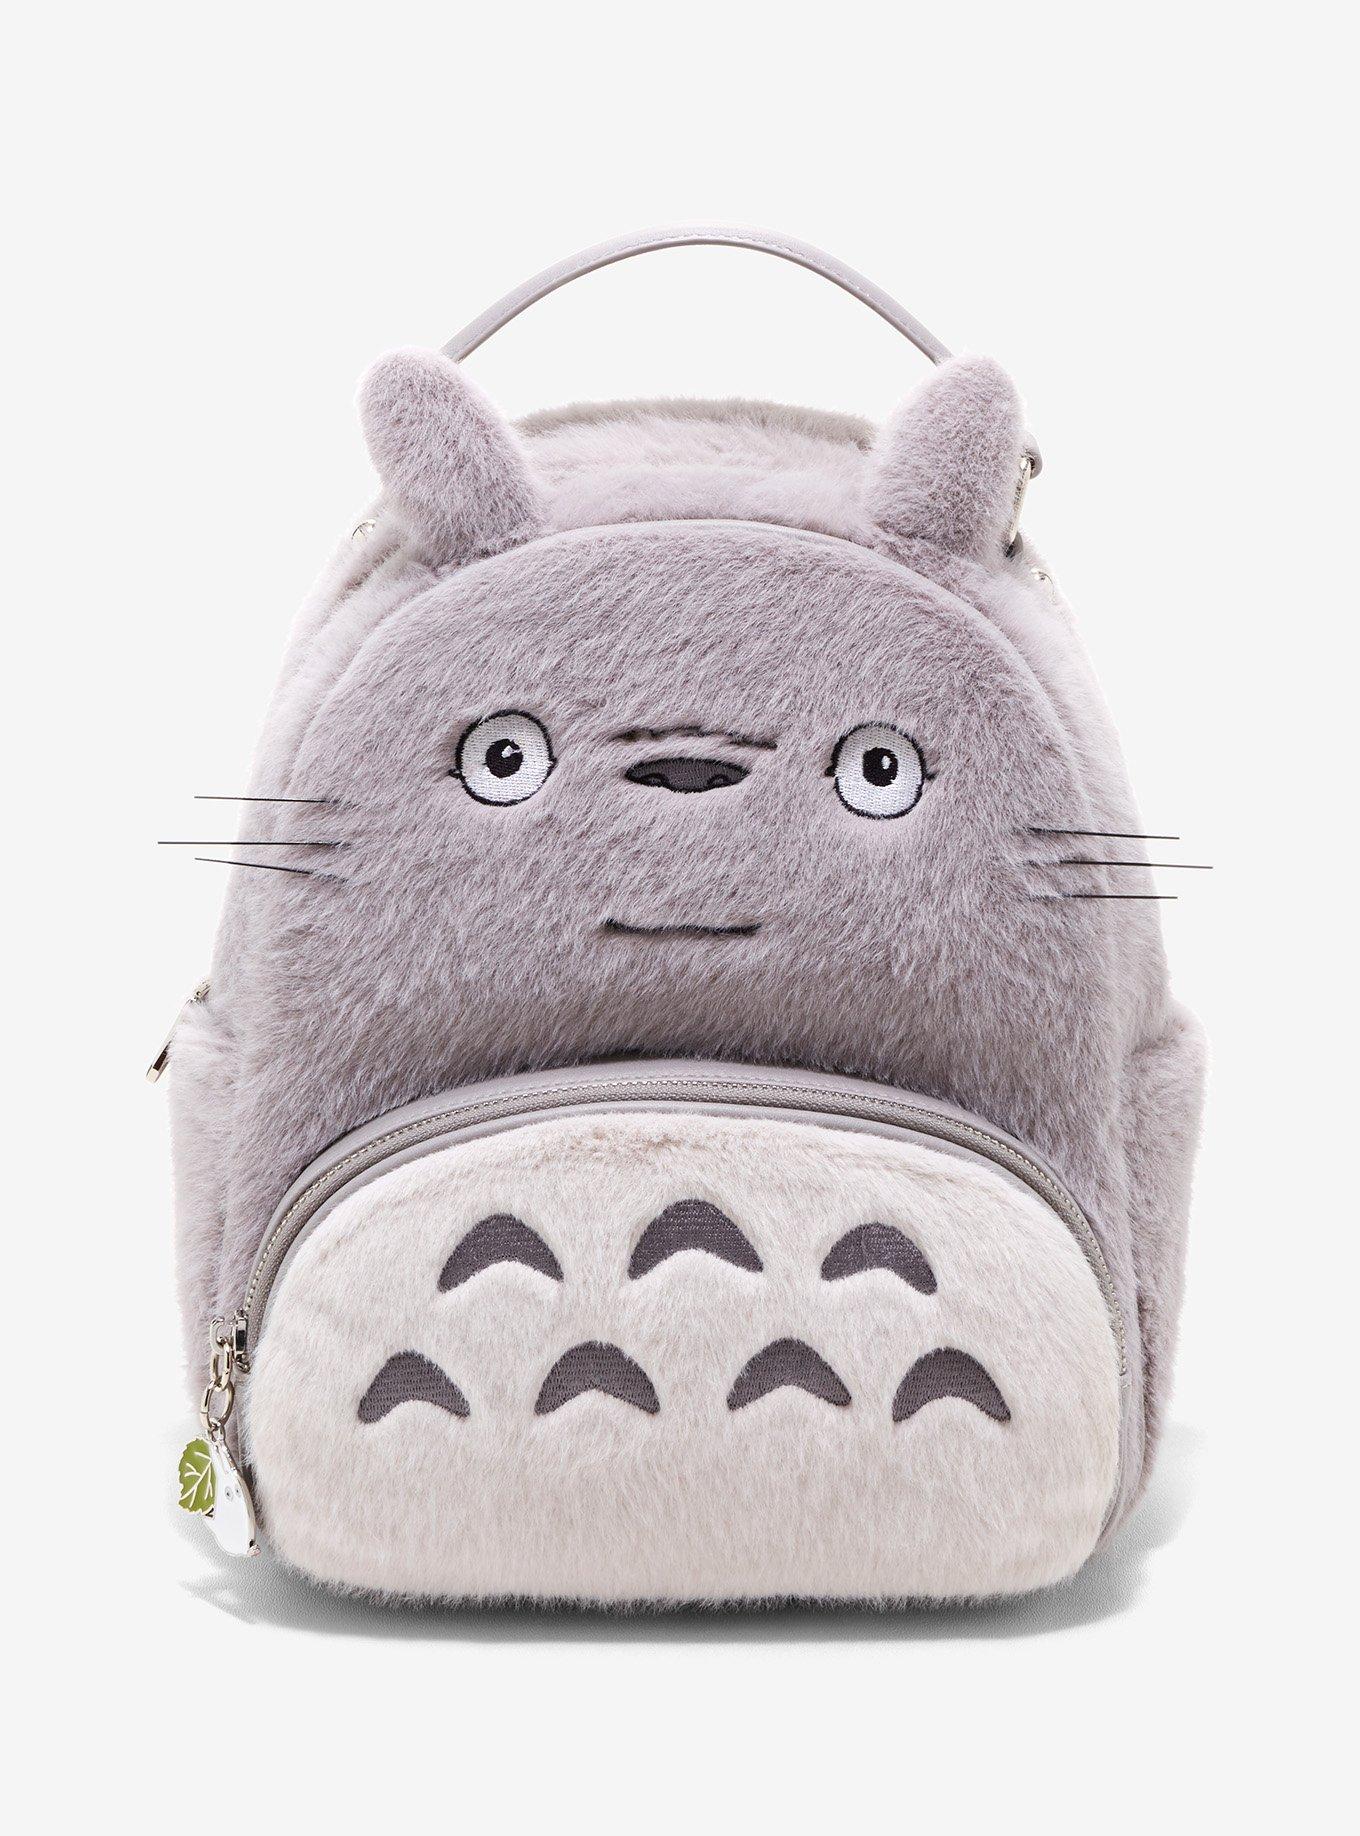 Avatar: The Last Airbender Chibi Animals Mini Backpack - BoxLunch Exclusive, BoxLunch